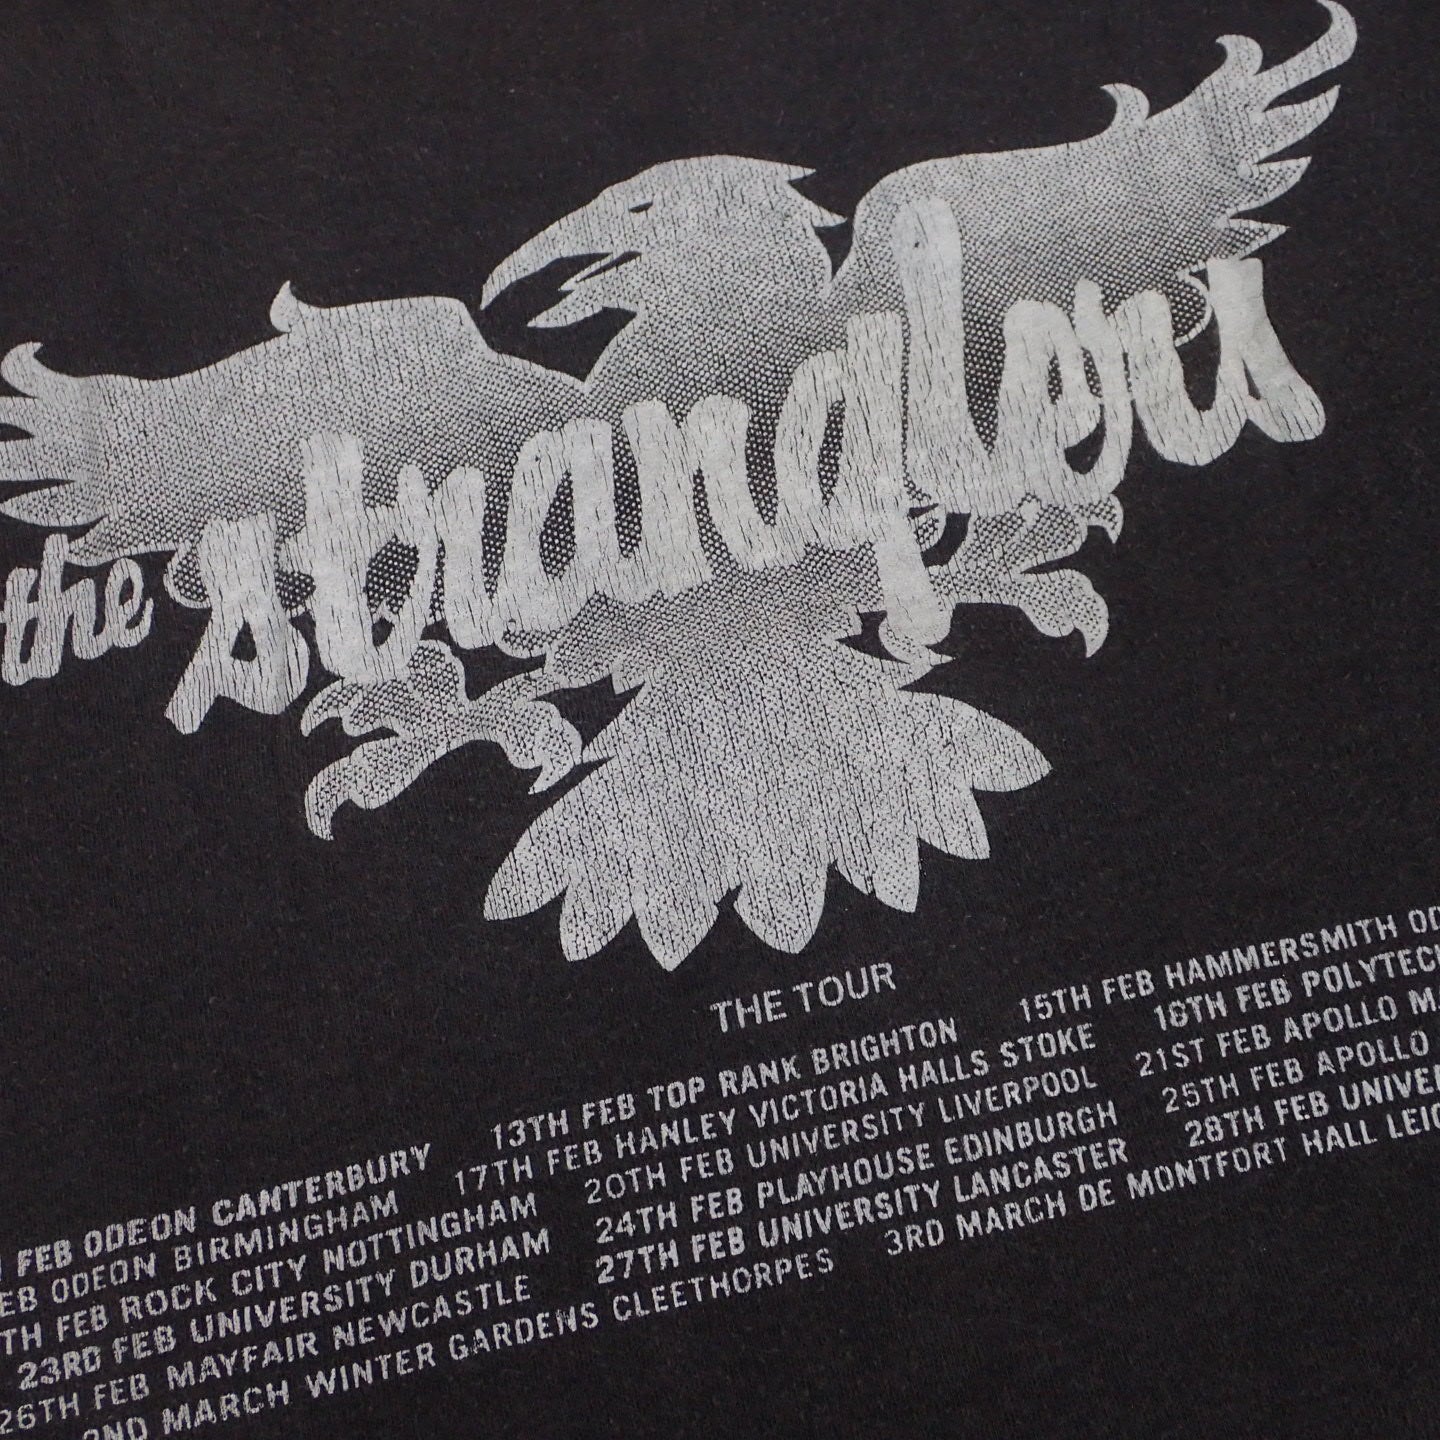 80s The Stranglers " The Gospel According To The Maninblack Tee"